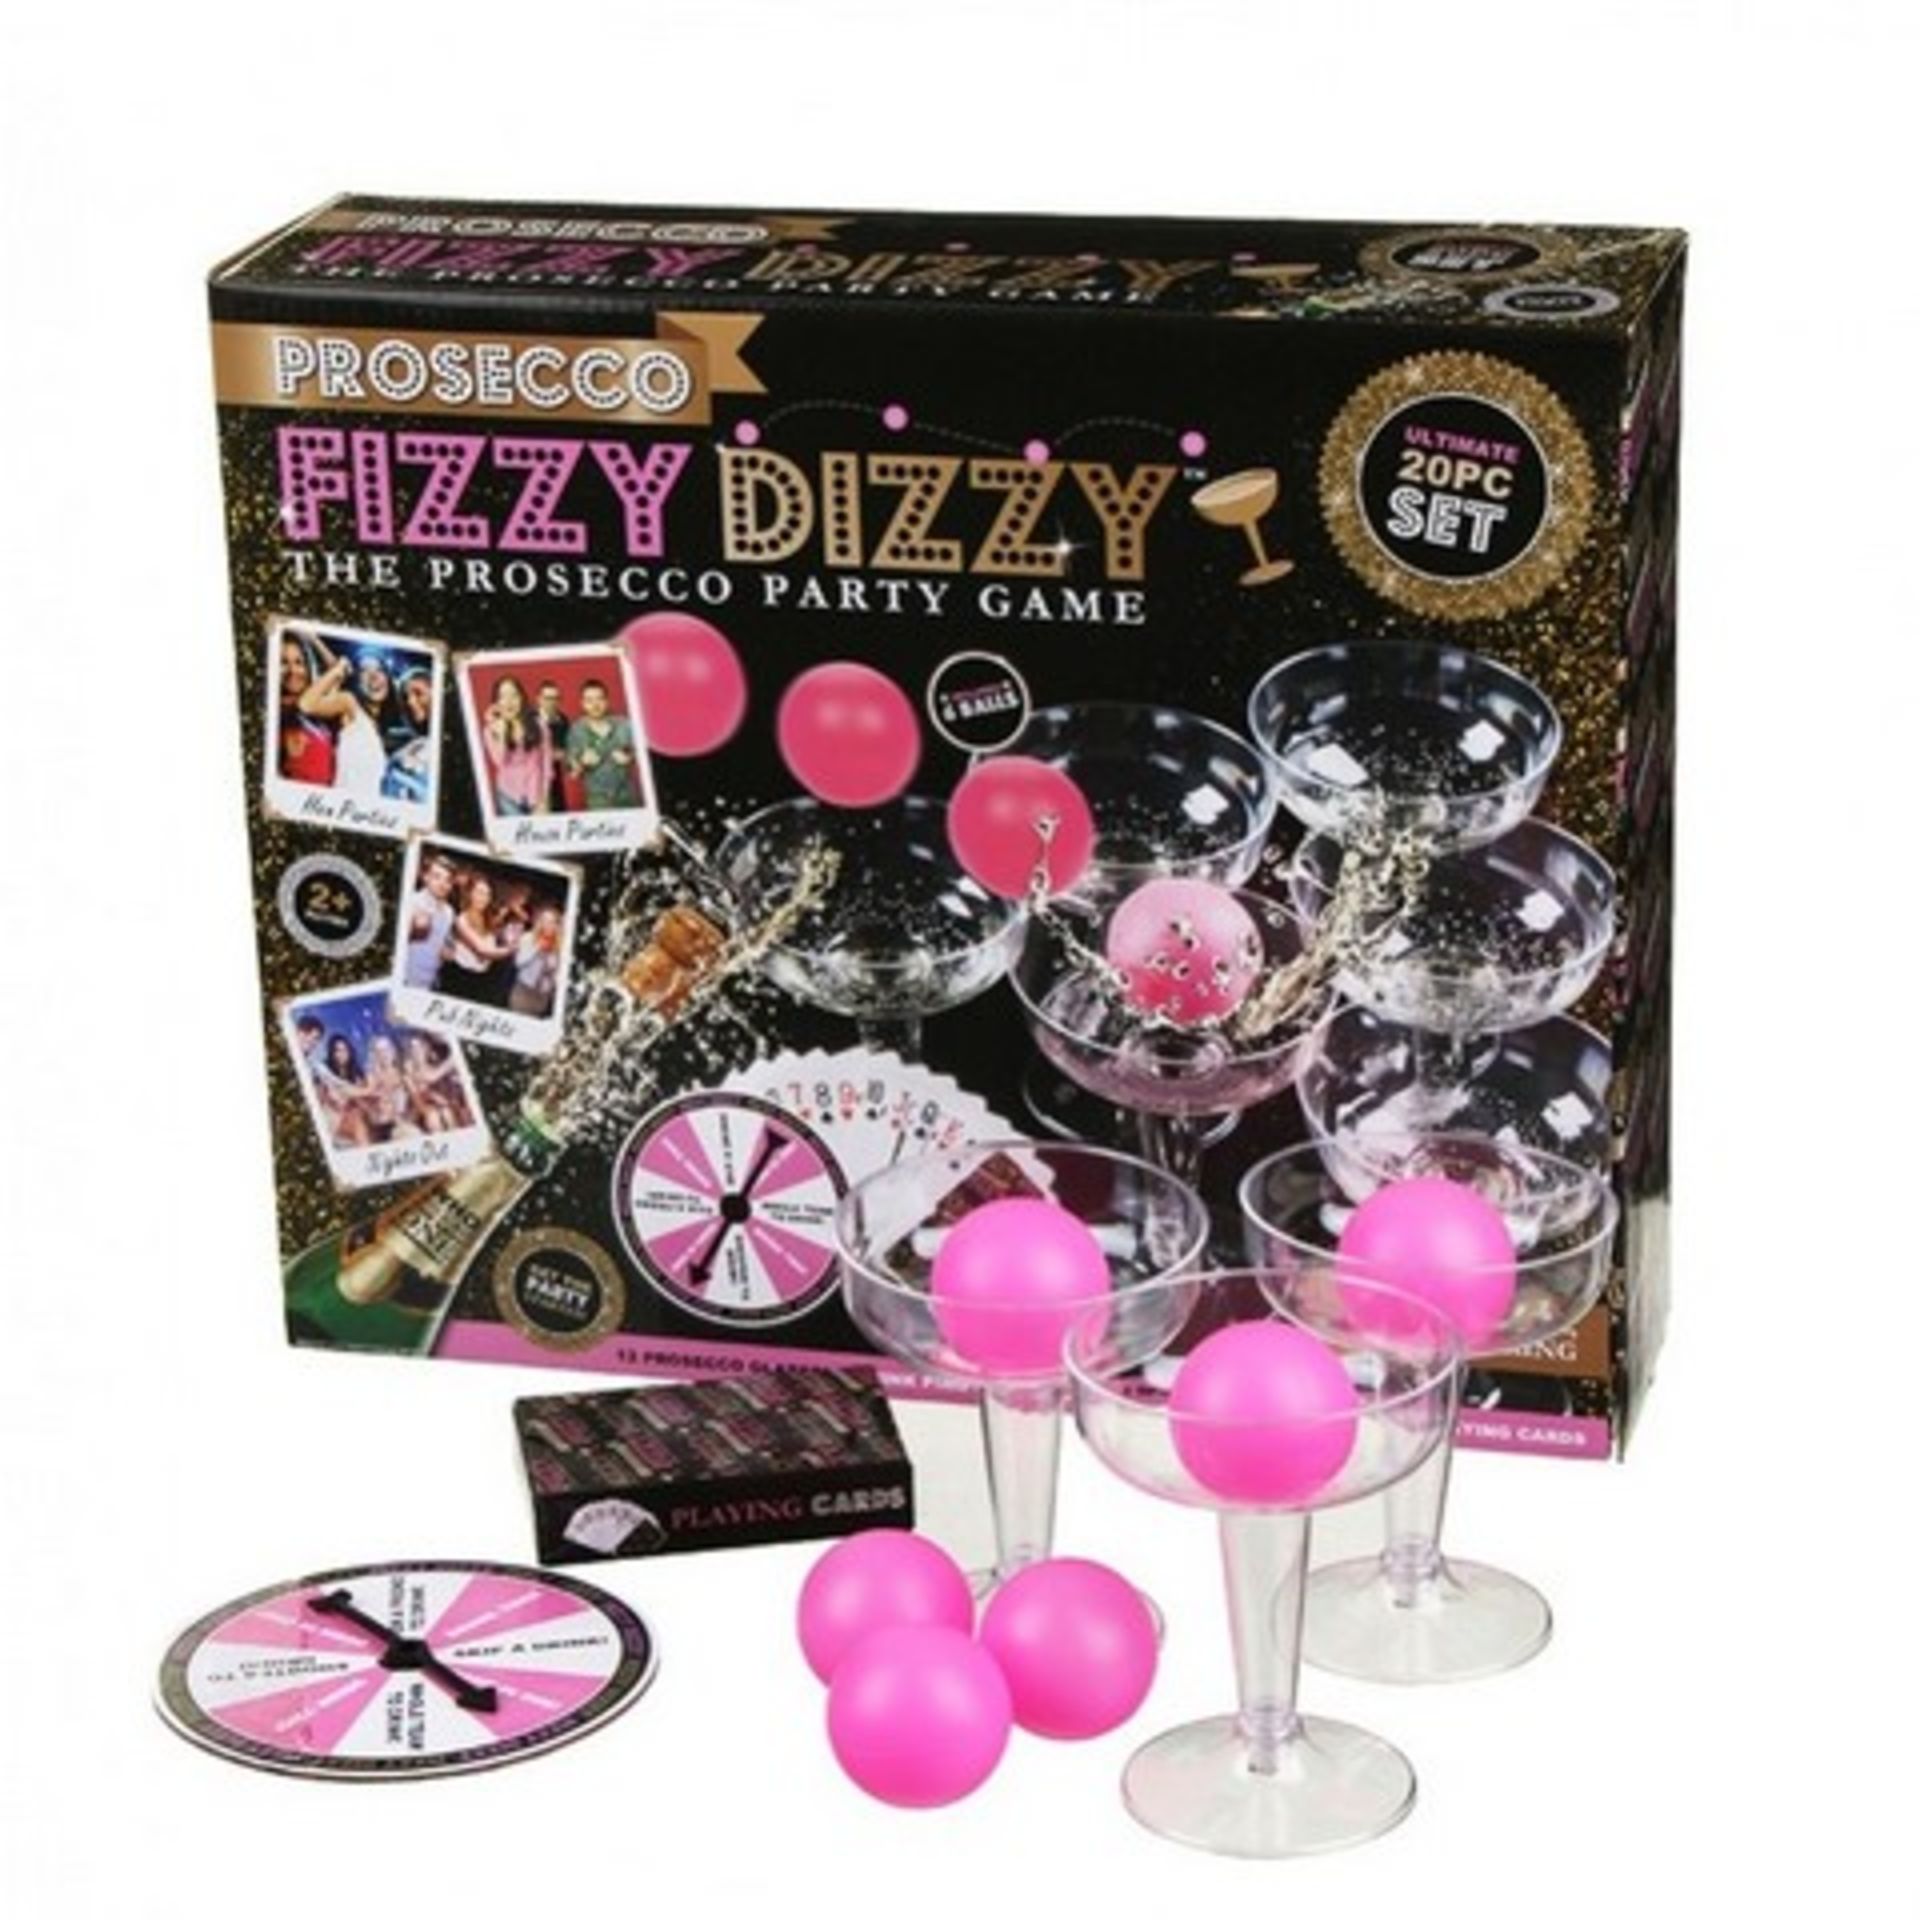 + VAT Brand New Ultimate 20pce Fizzy Dizzy Prosecco Party Game - Includes Prosecco Glasses - Pink